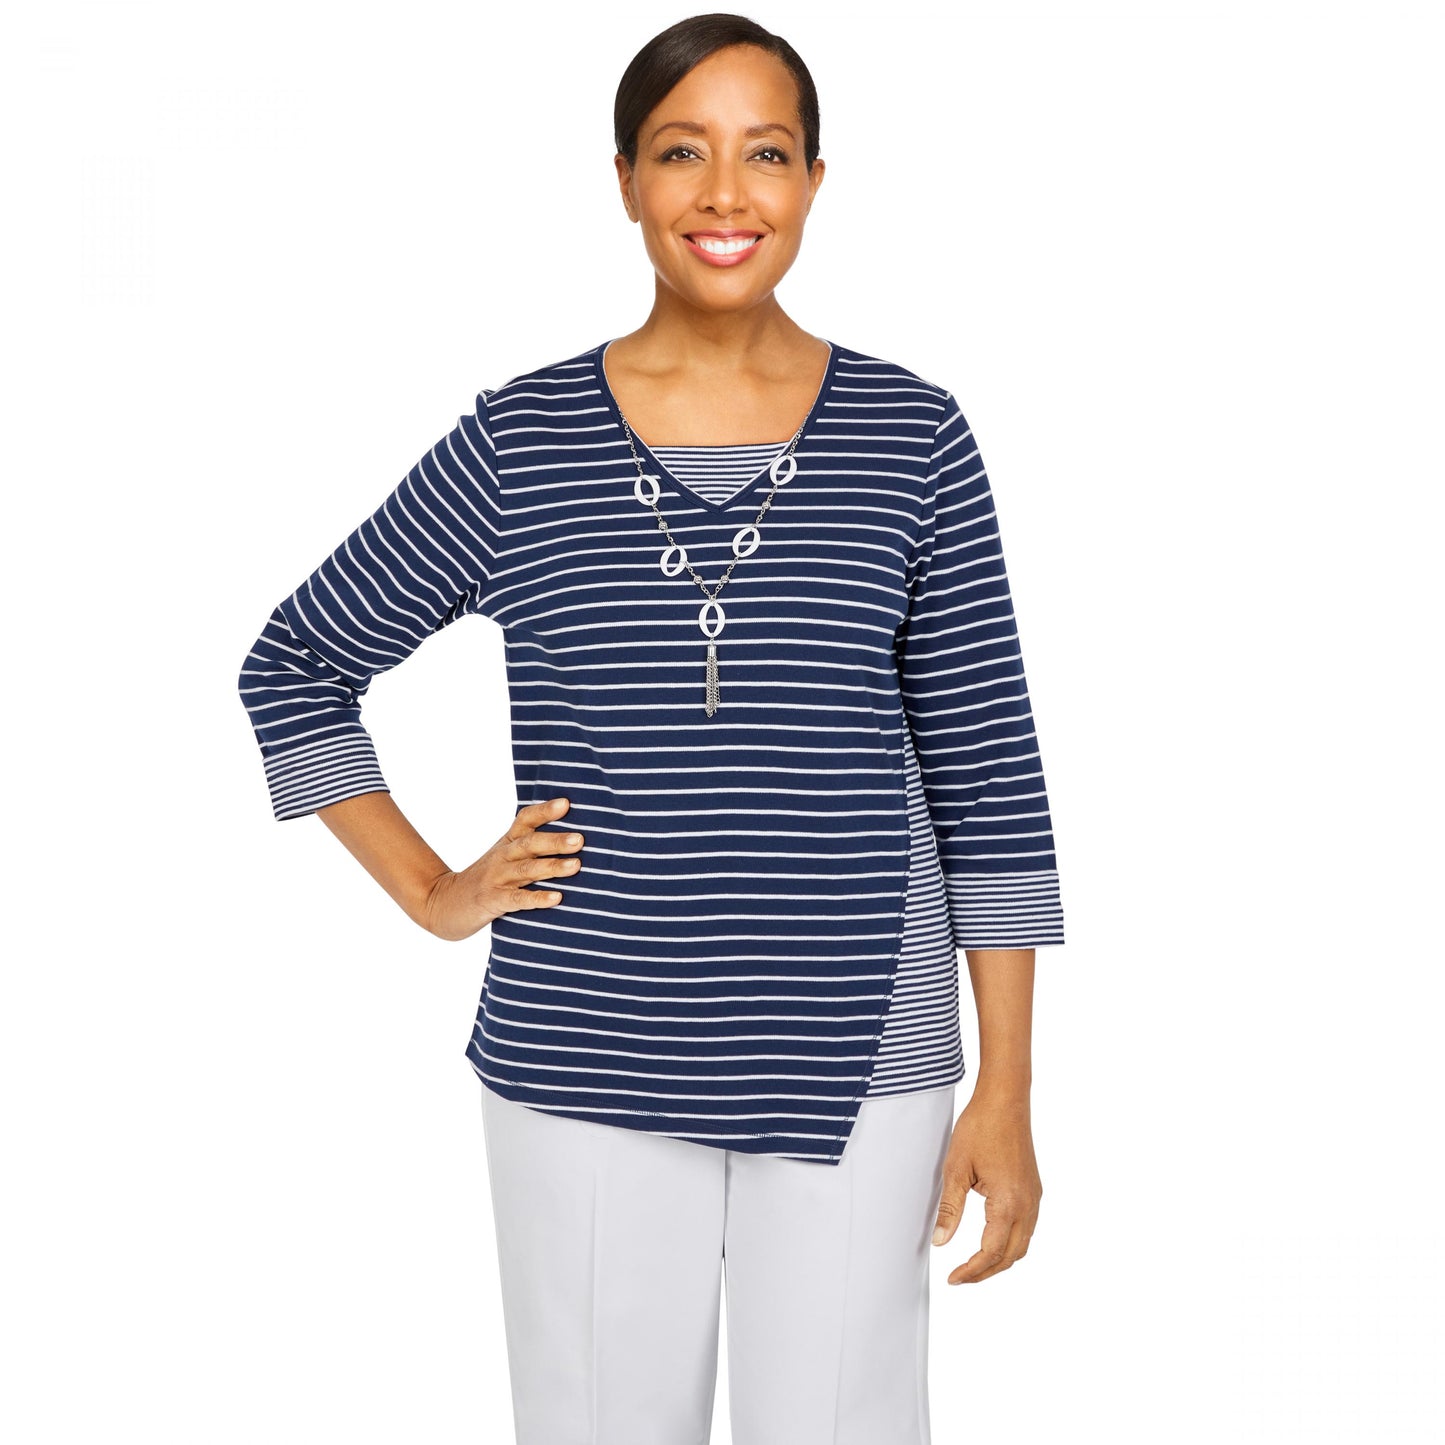 Newport Spliced Stripe Shirt With Necklace